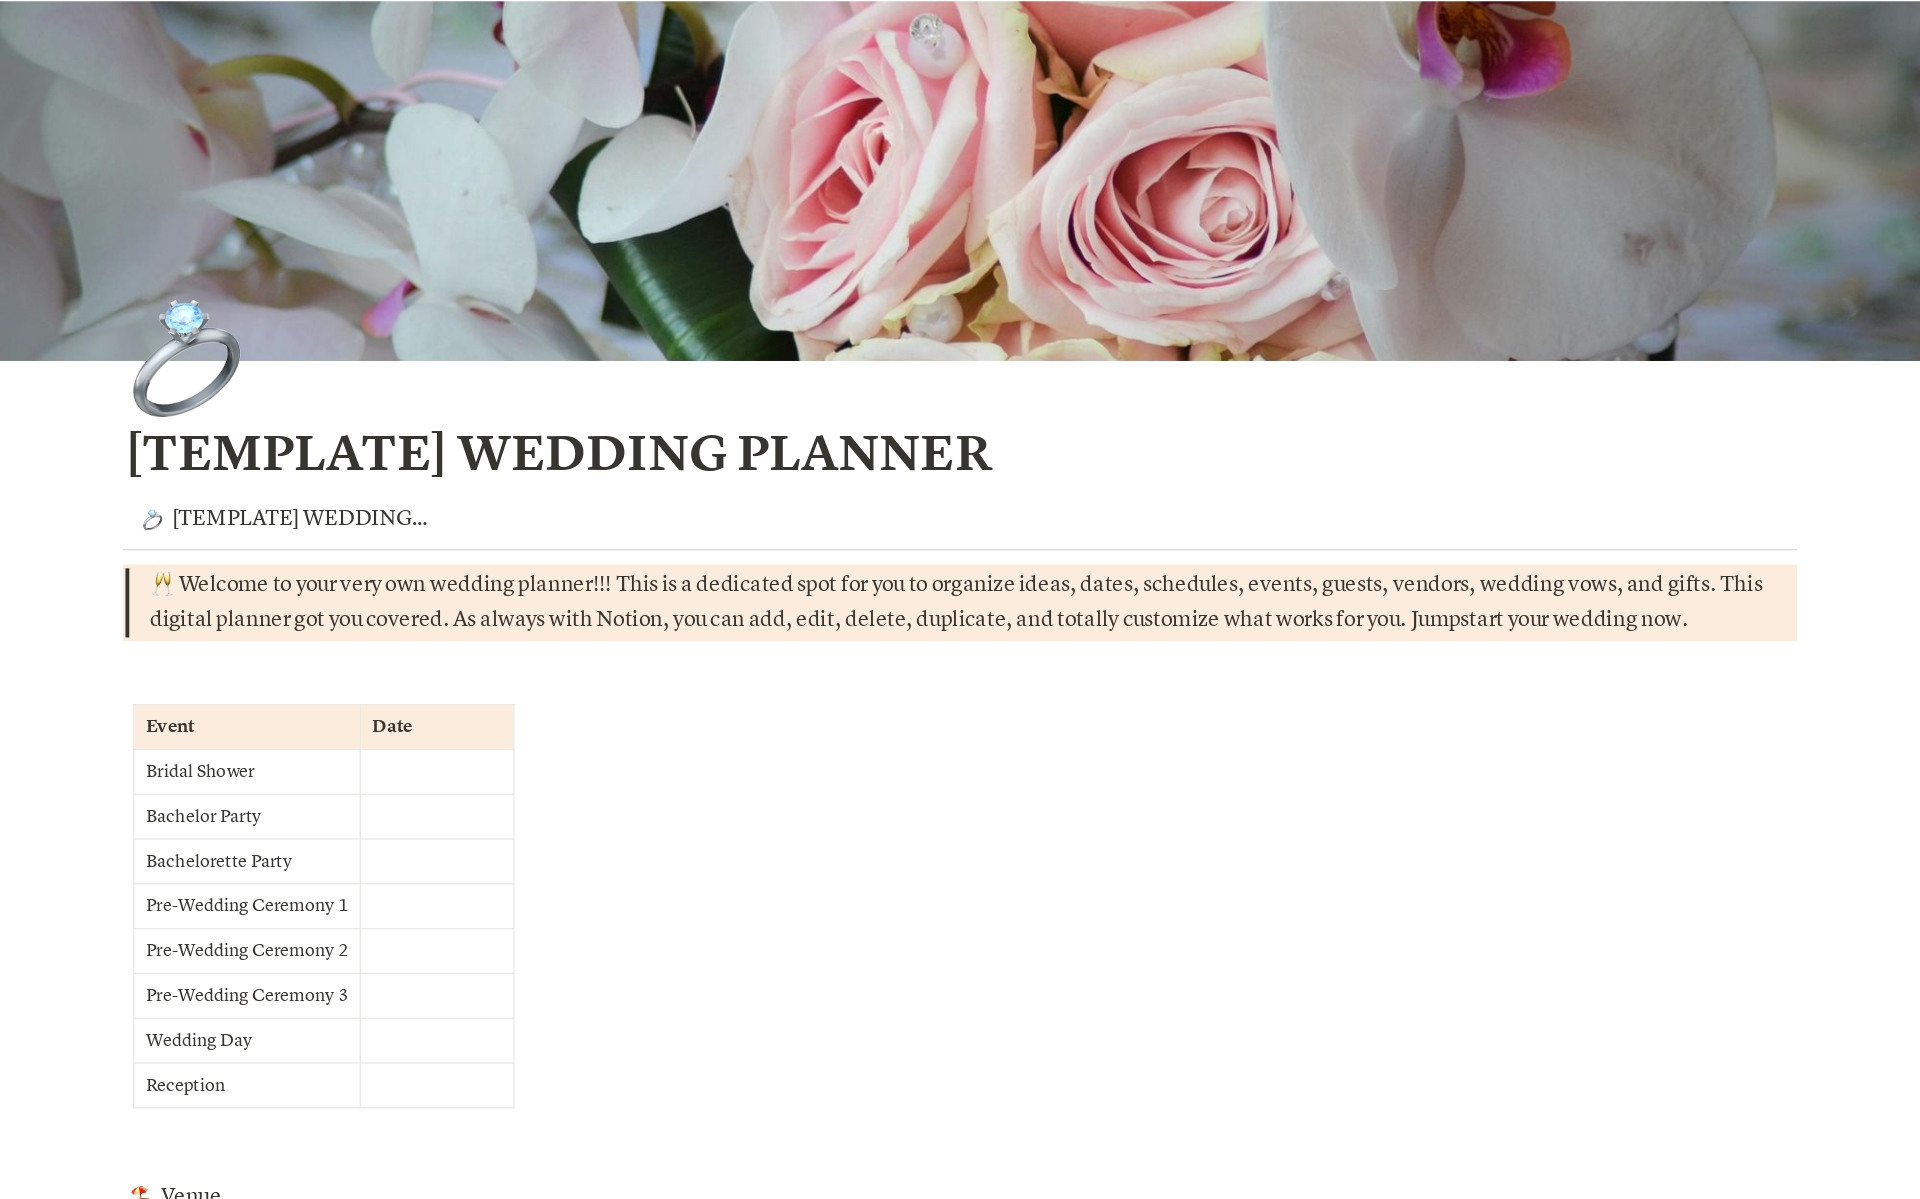 This is a digital planner for you to organize your wedding ideas, dates, schedules, events, guests, vendors, wedding vows, gifts, and much more. The template is gender-neutral and faith-neutral. Customize your wedding your way!